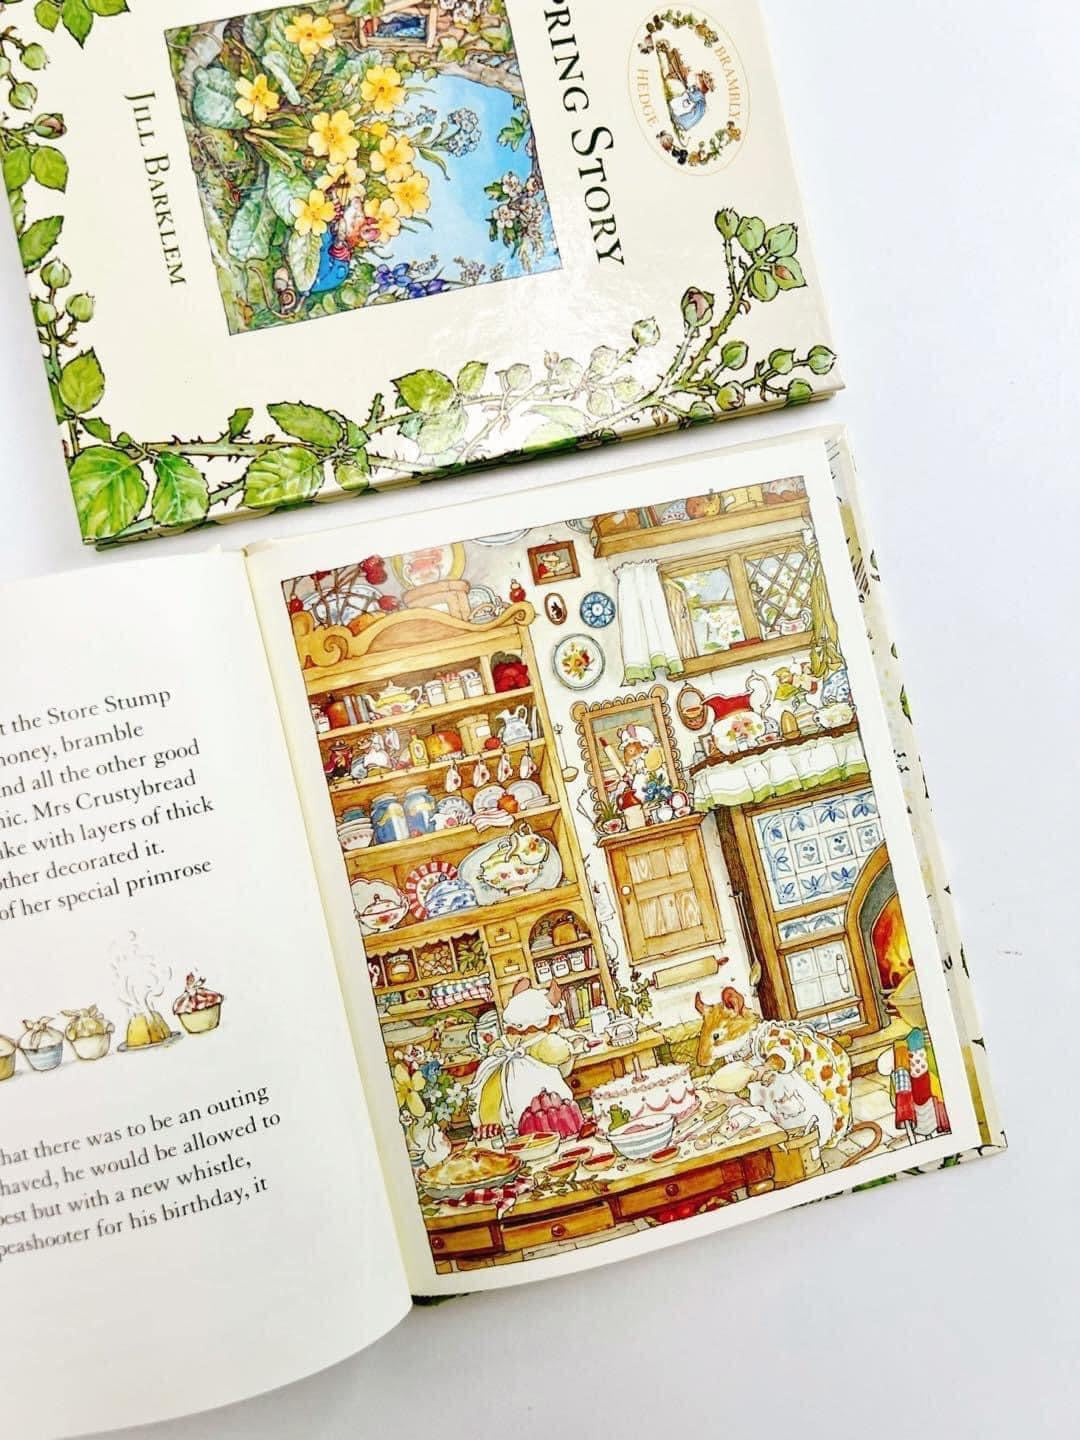 🐹The Brambly Hedge Library 🐹
🌸8 classic countryside tales